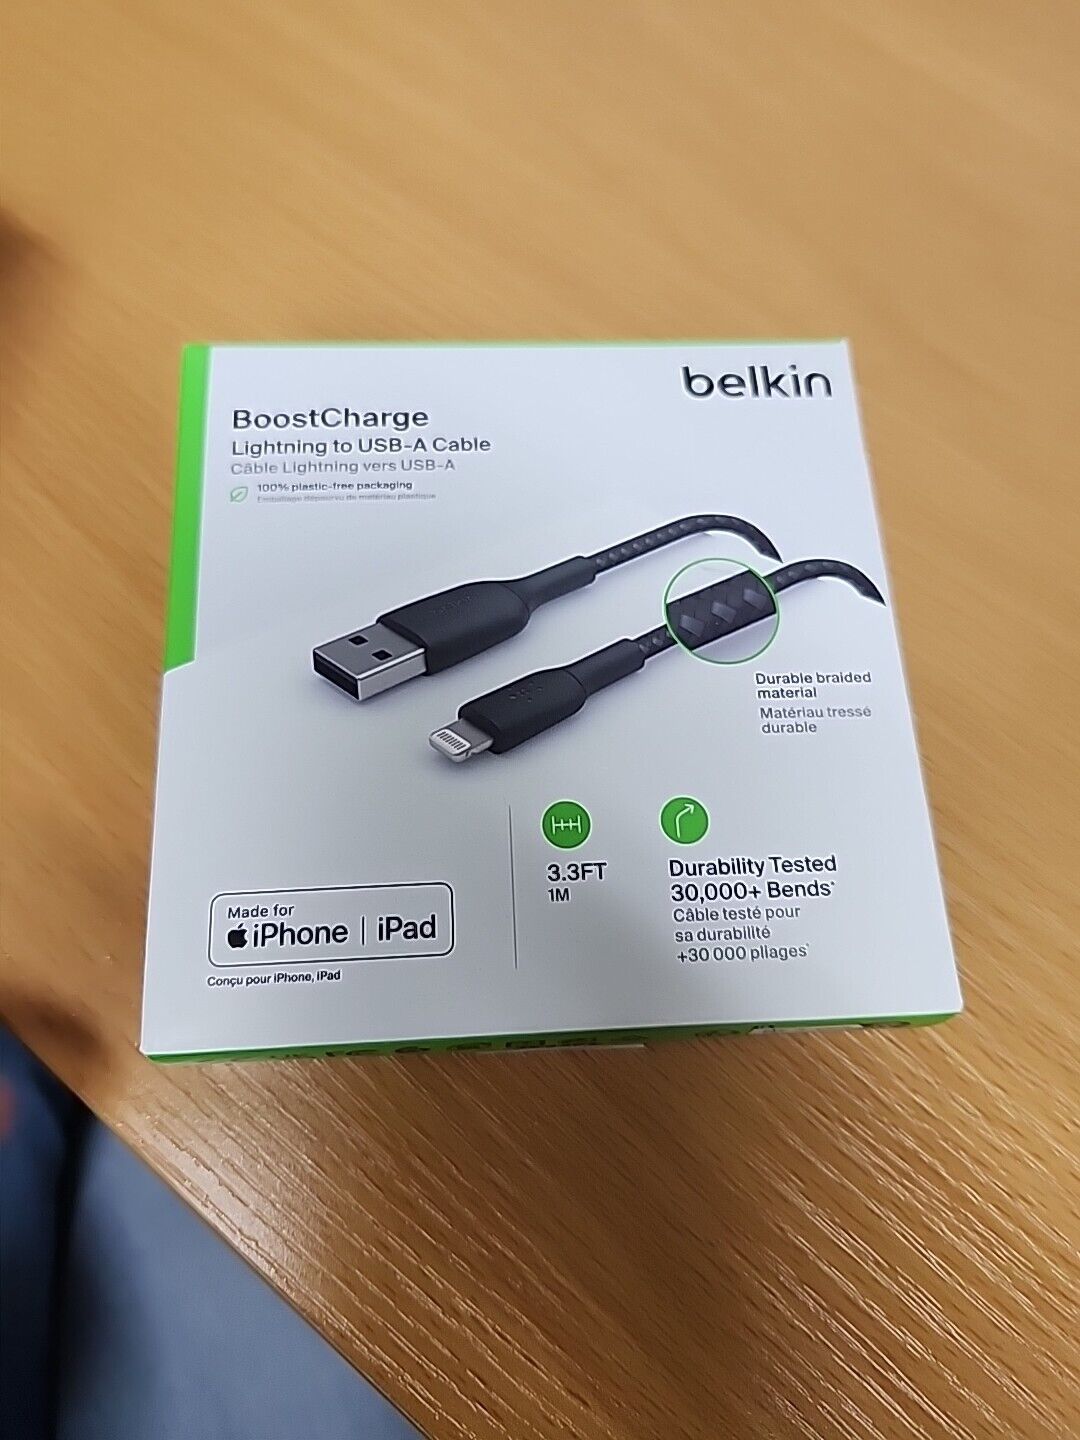 New Belkin Boost Charge Lightning USB-A IPhone Cable 3 Feet, Black